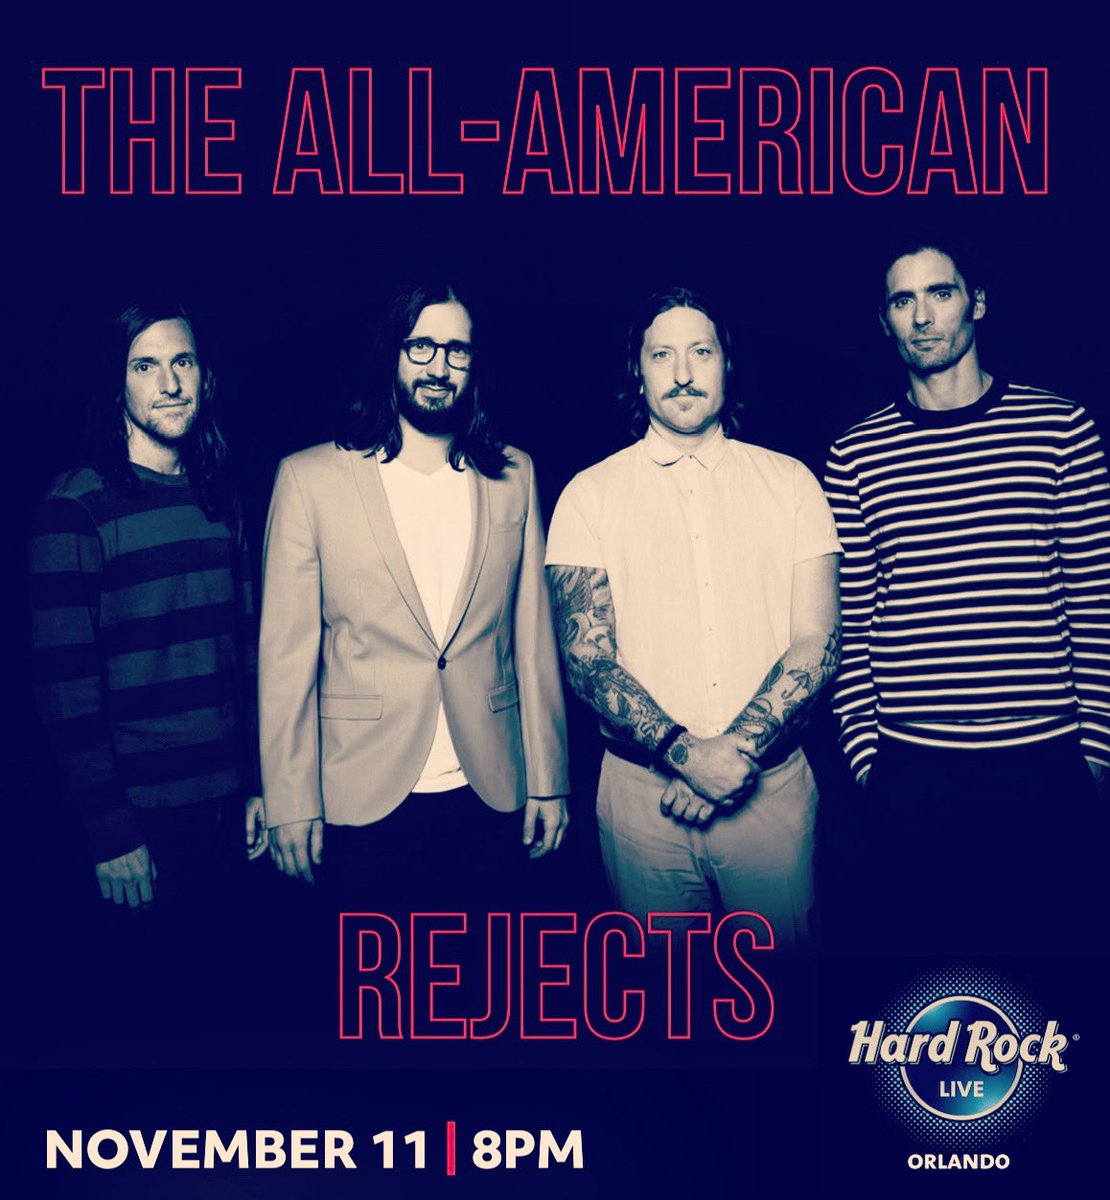 11/11 Orlando, Hard Rock Live! Make your wish for what you want us to play (spoiler: it won’t be “11:11”) Tickets: tinyurl.com/2p9bmd8v